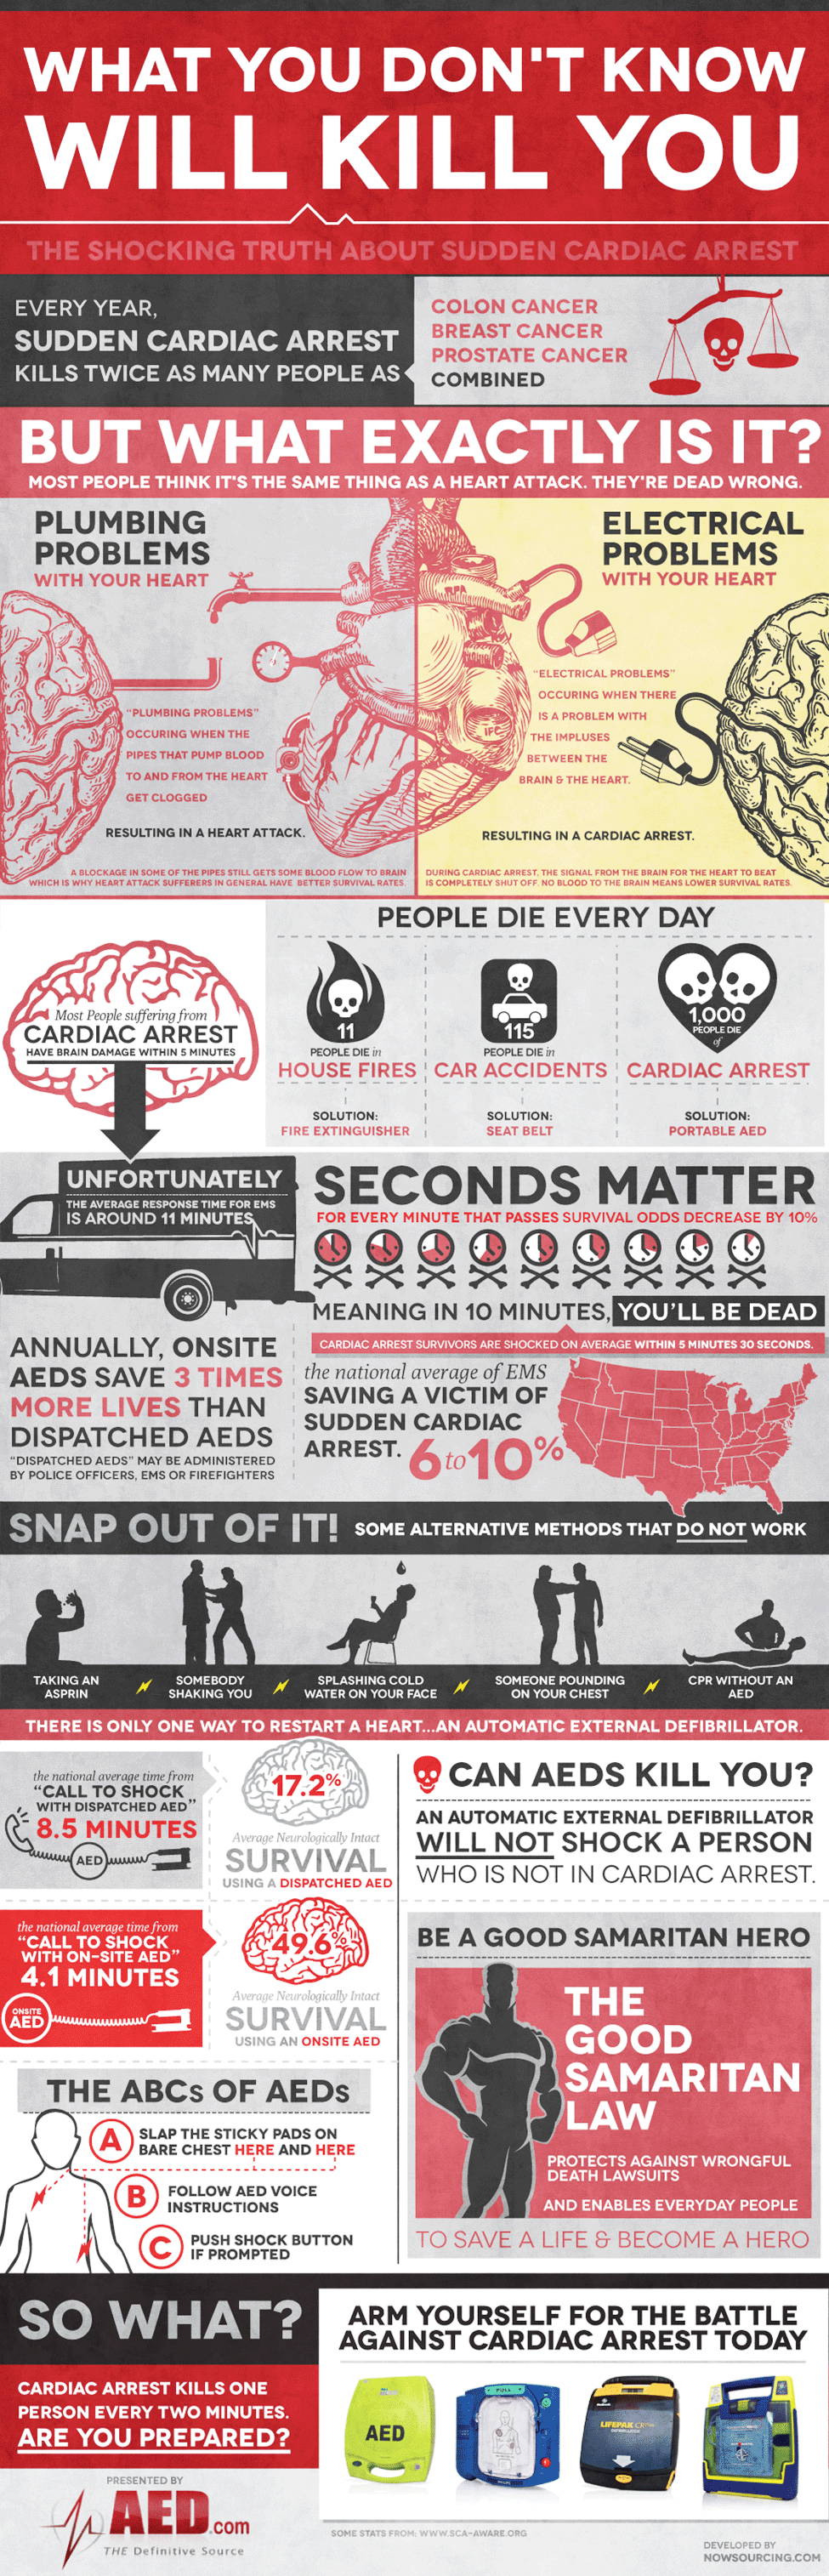 The Shocking Truth About Sudden Cardiac Arrest